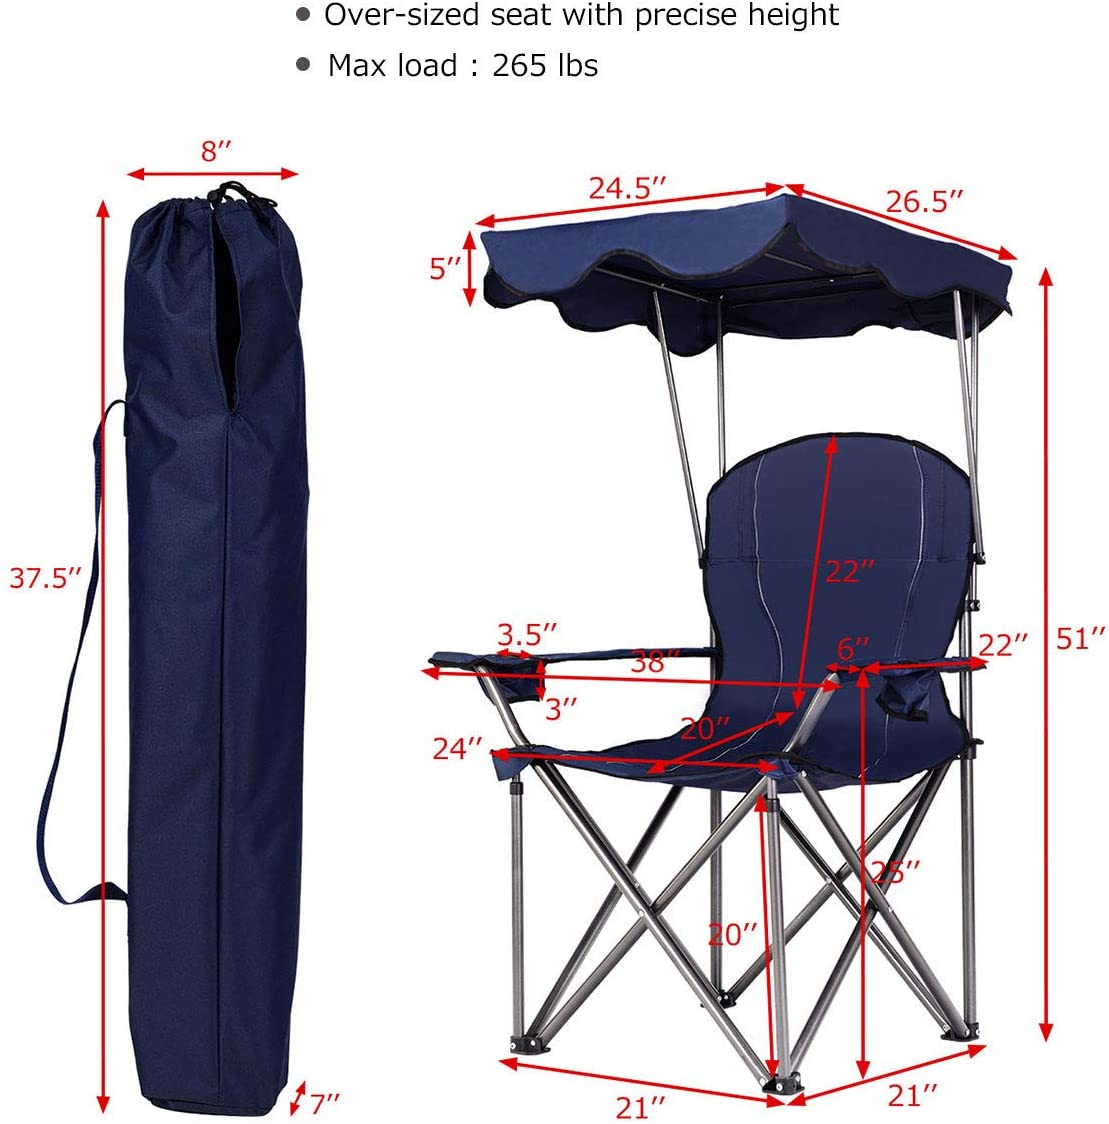 Beach Chair with Canopy Shade, Folding Lawn Chair with Umbrella Cup Holder & Carry Bag, Portable Sunshade Chair for Adults for Outdoor Travel Hiking Fishing, Blue